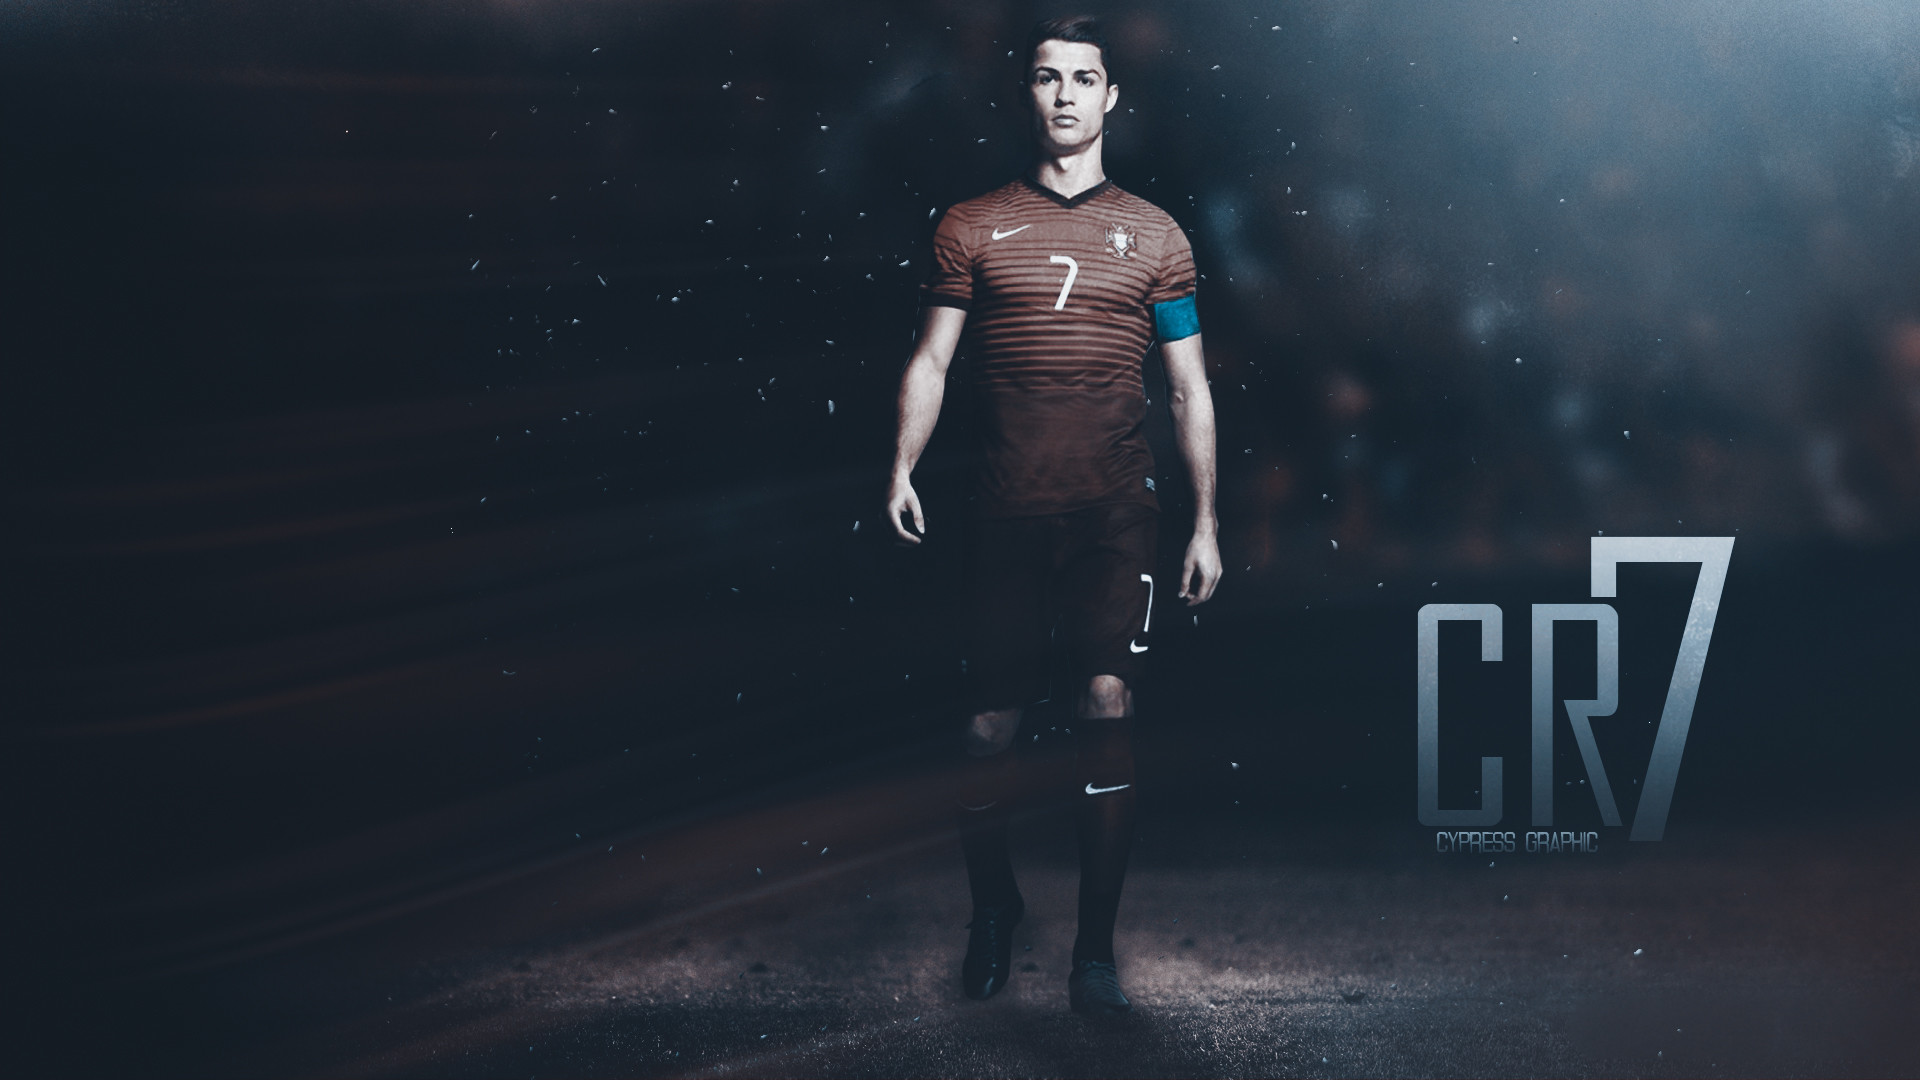 1920x1080 ... 59 Cristiano Ronaldo HD Wallpapers | Backgrounds - Wallpaper Abyss ...